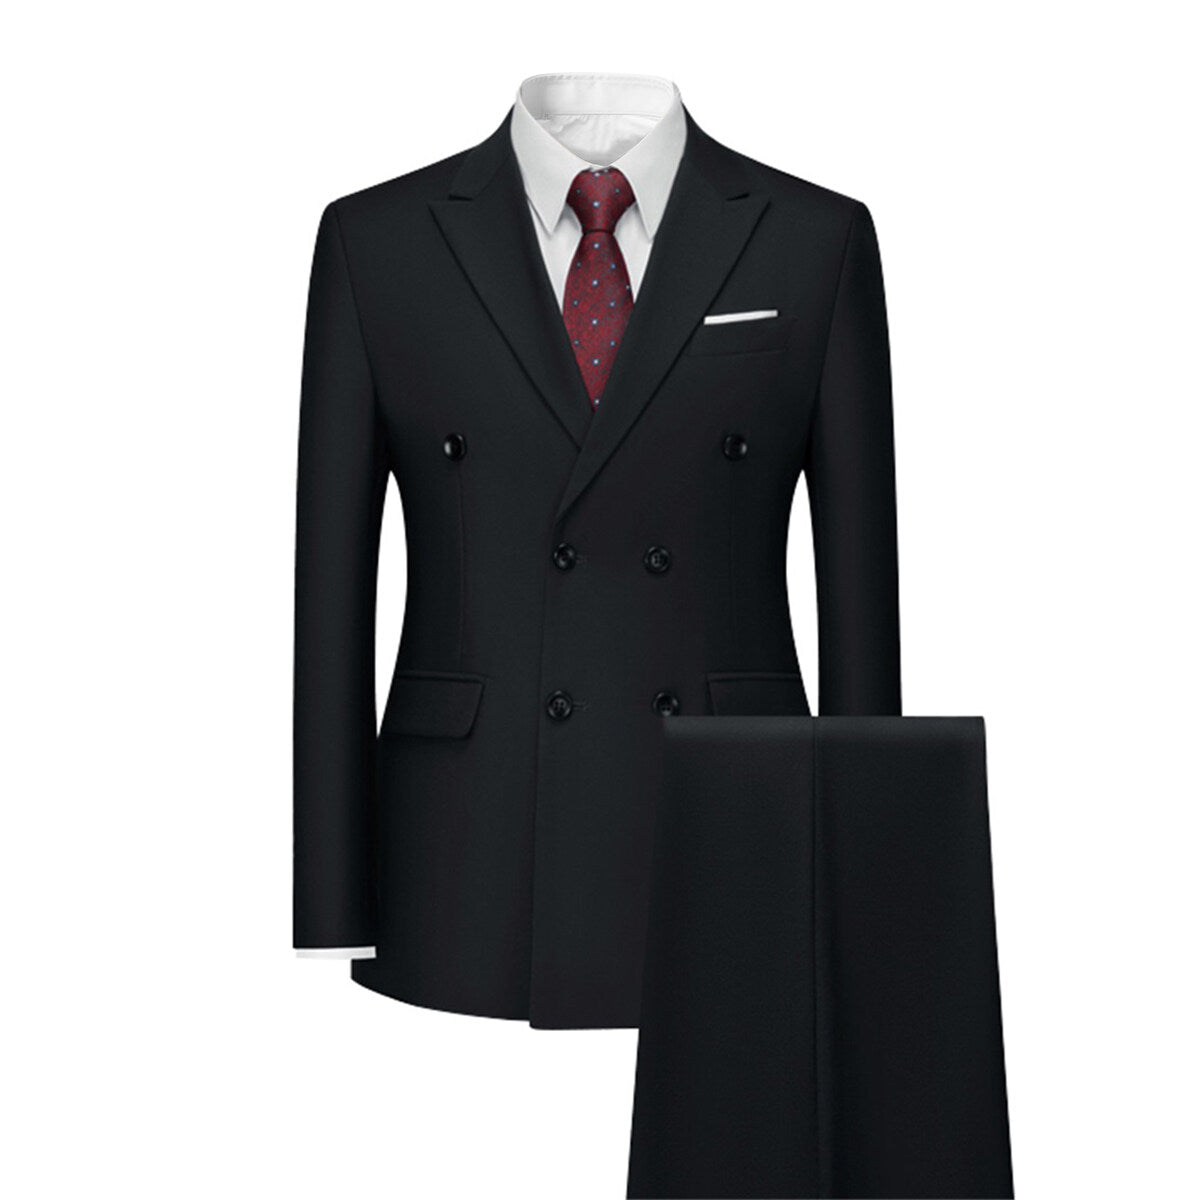 Men's Solid Color Double Breasted Business Suit Black